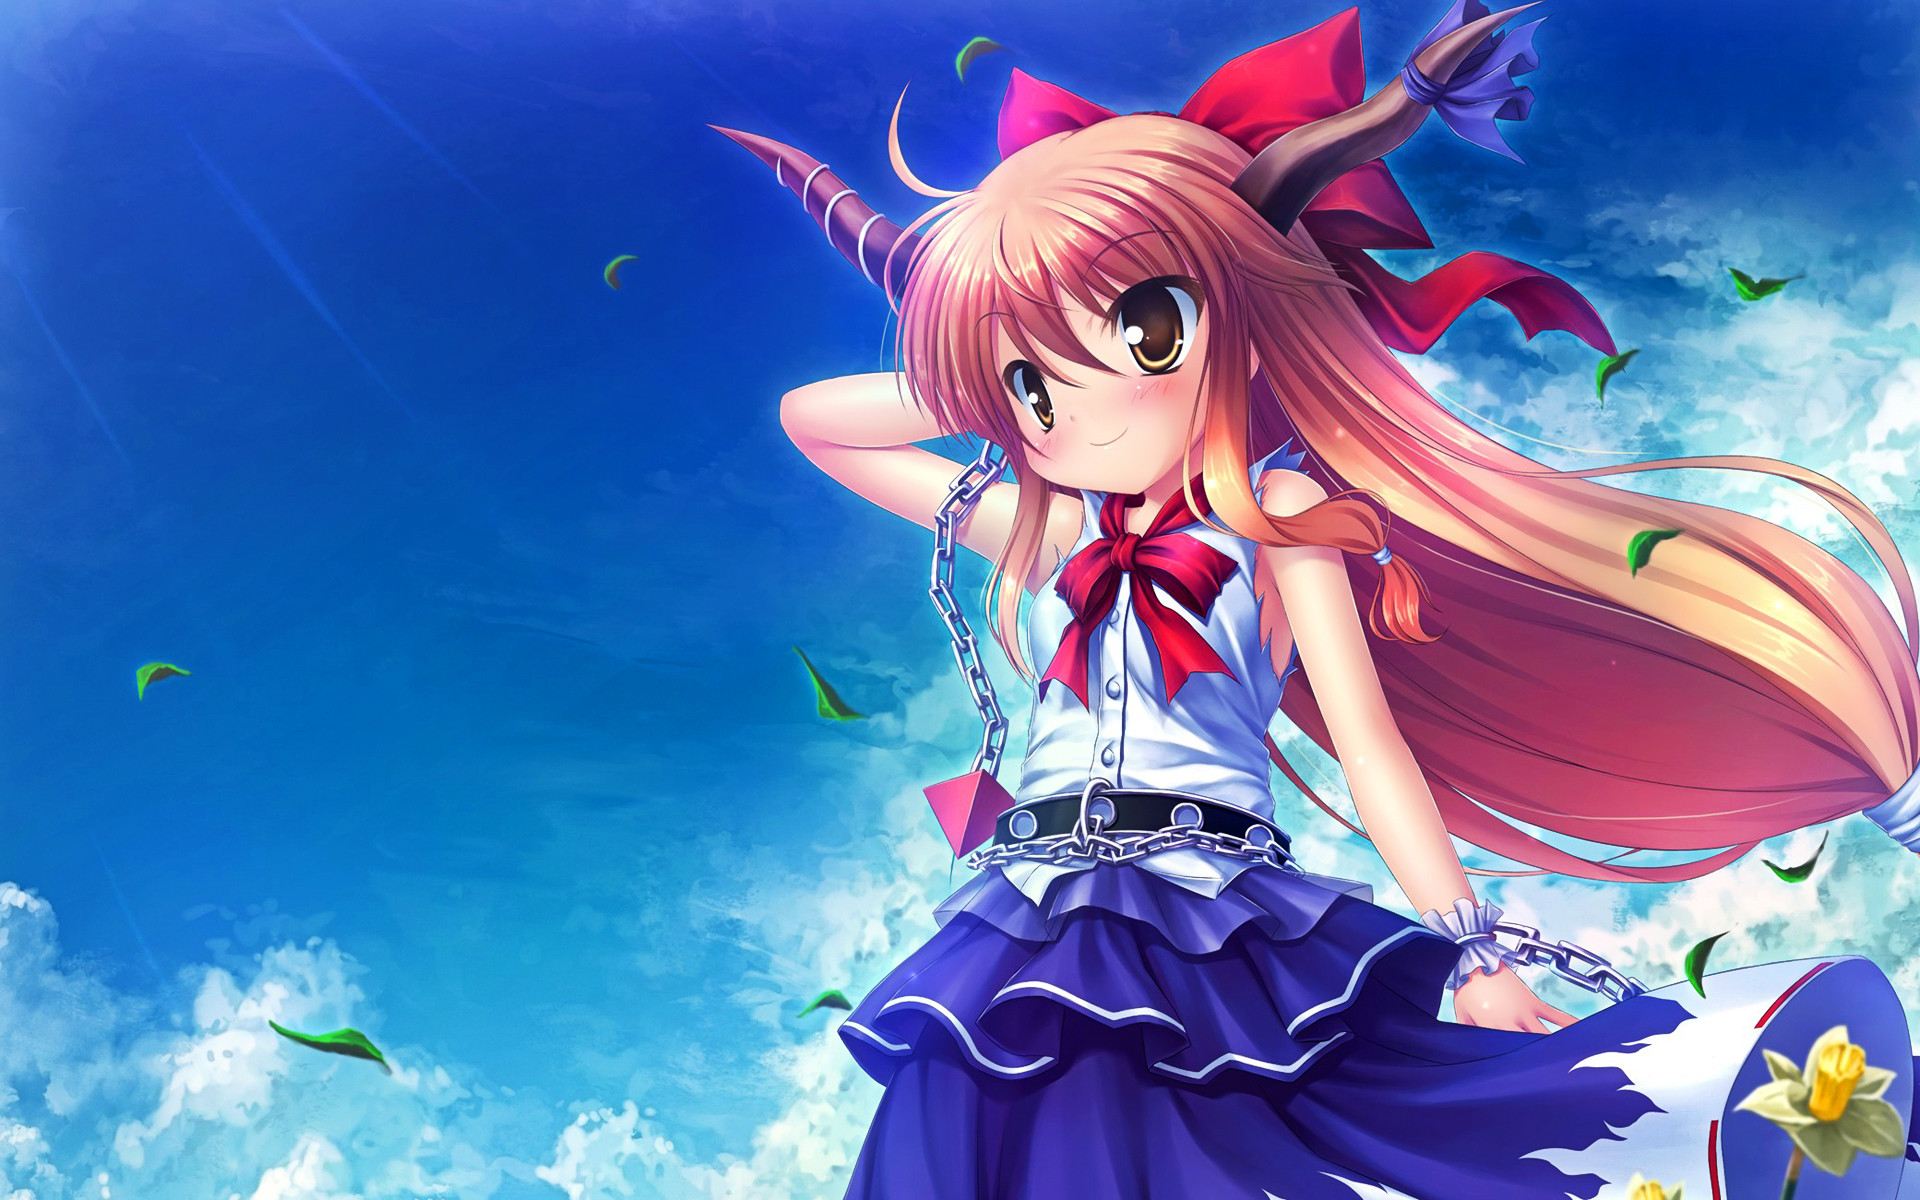 1920x1200 Hd Wallpapers Anime Cute |Free HD Wallpapers - ImgHD : Browse and .